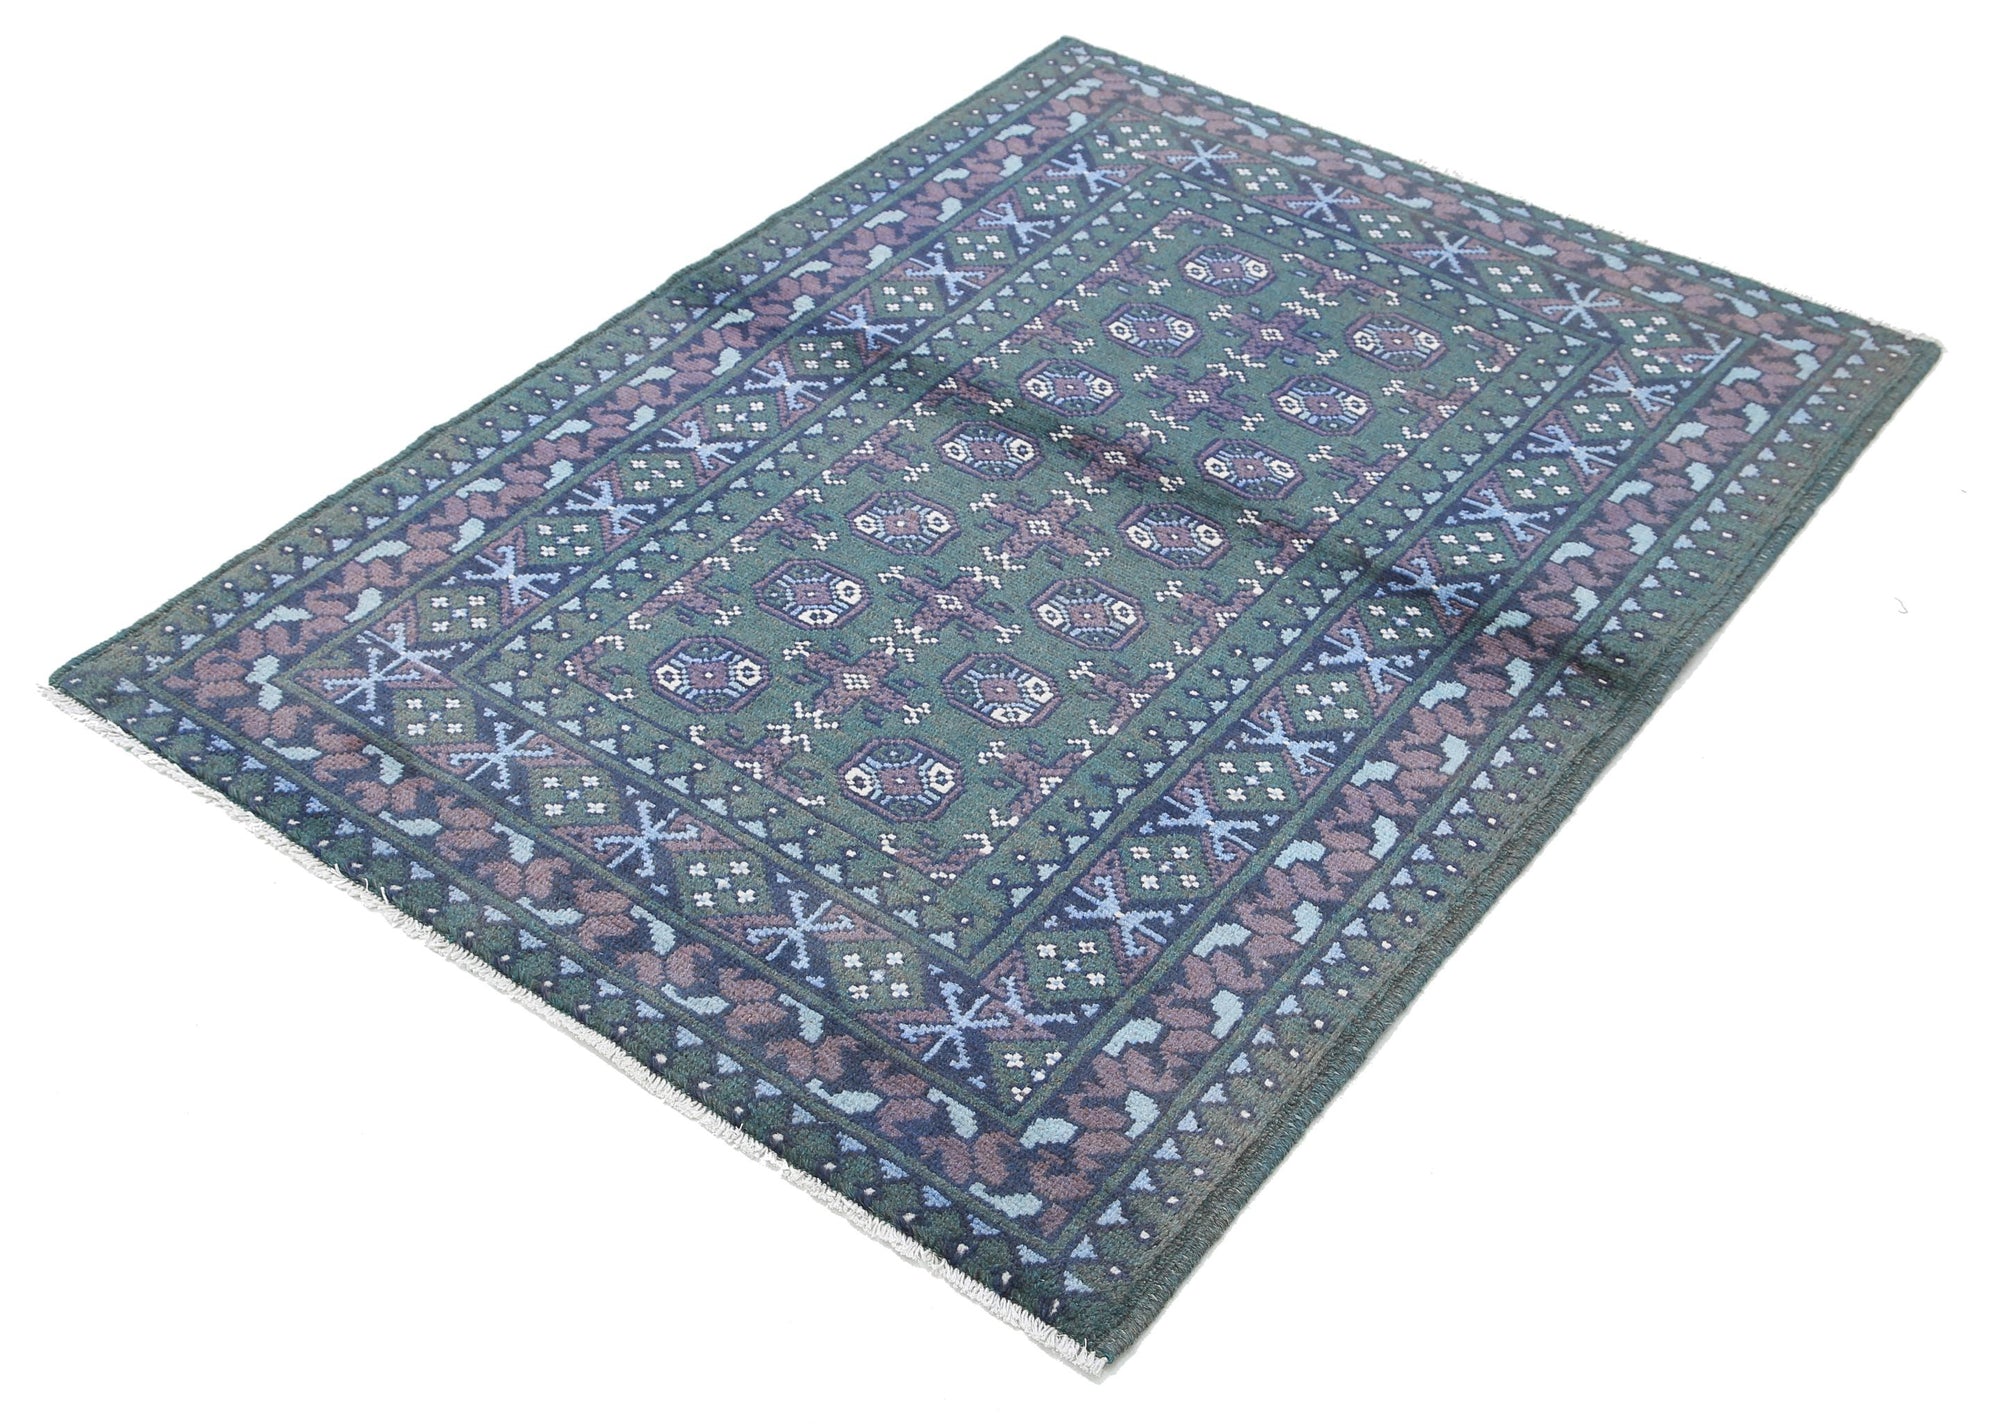 Revival-hand-knotted-gul-collection-wool-rug-5013908-2.jpg